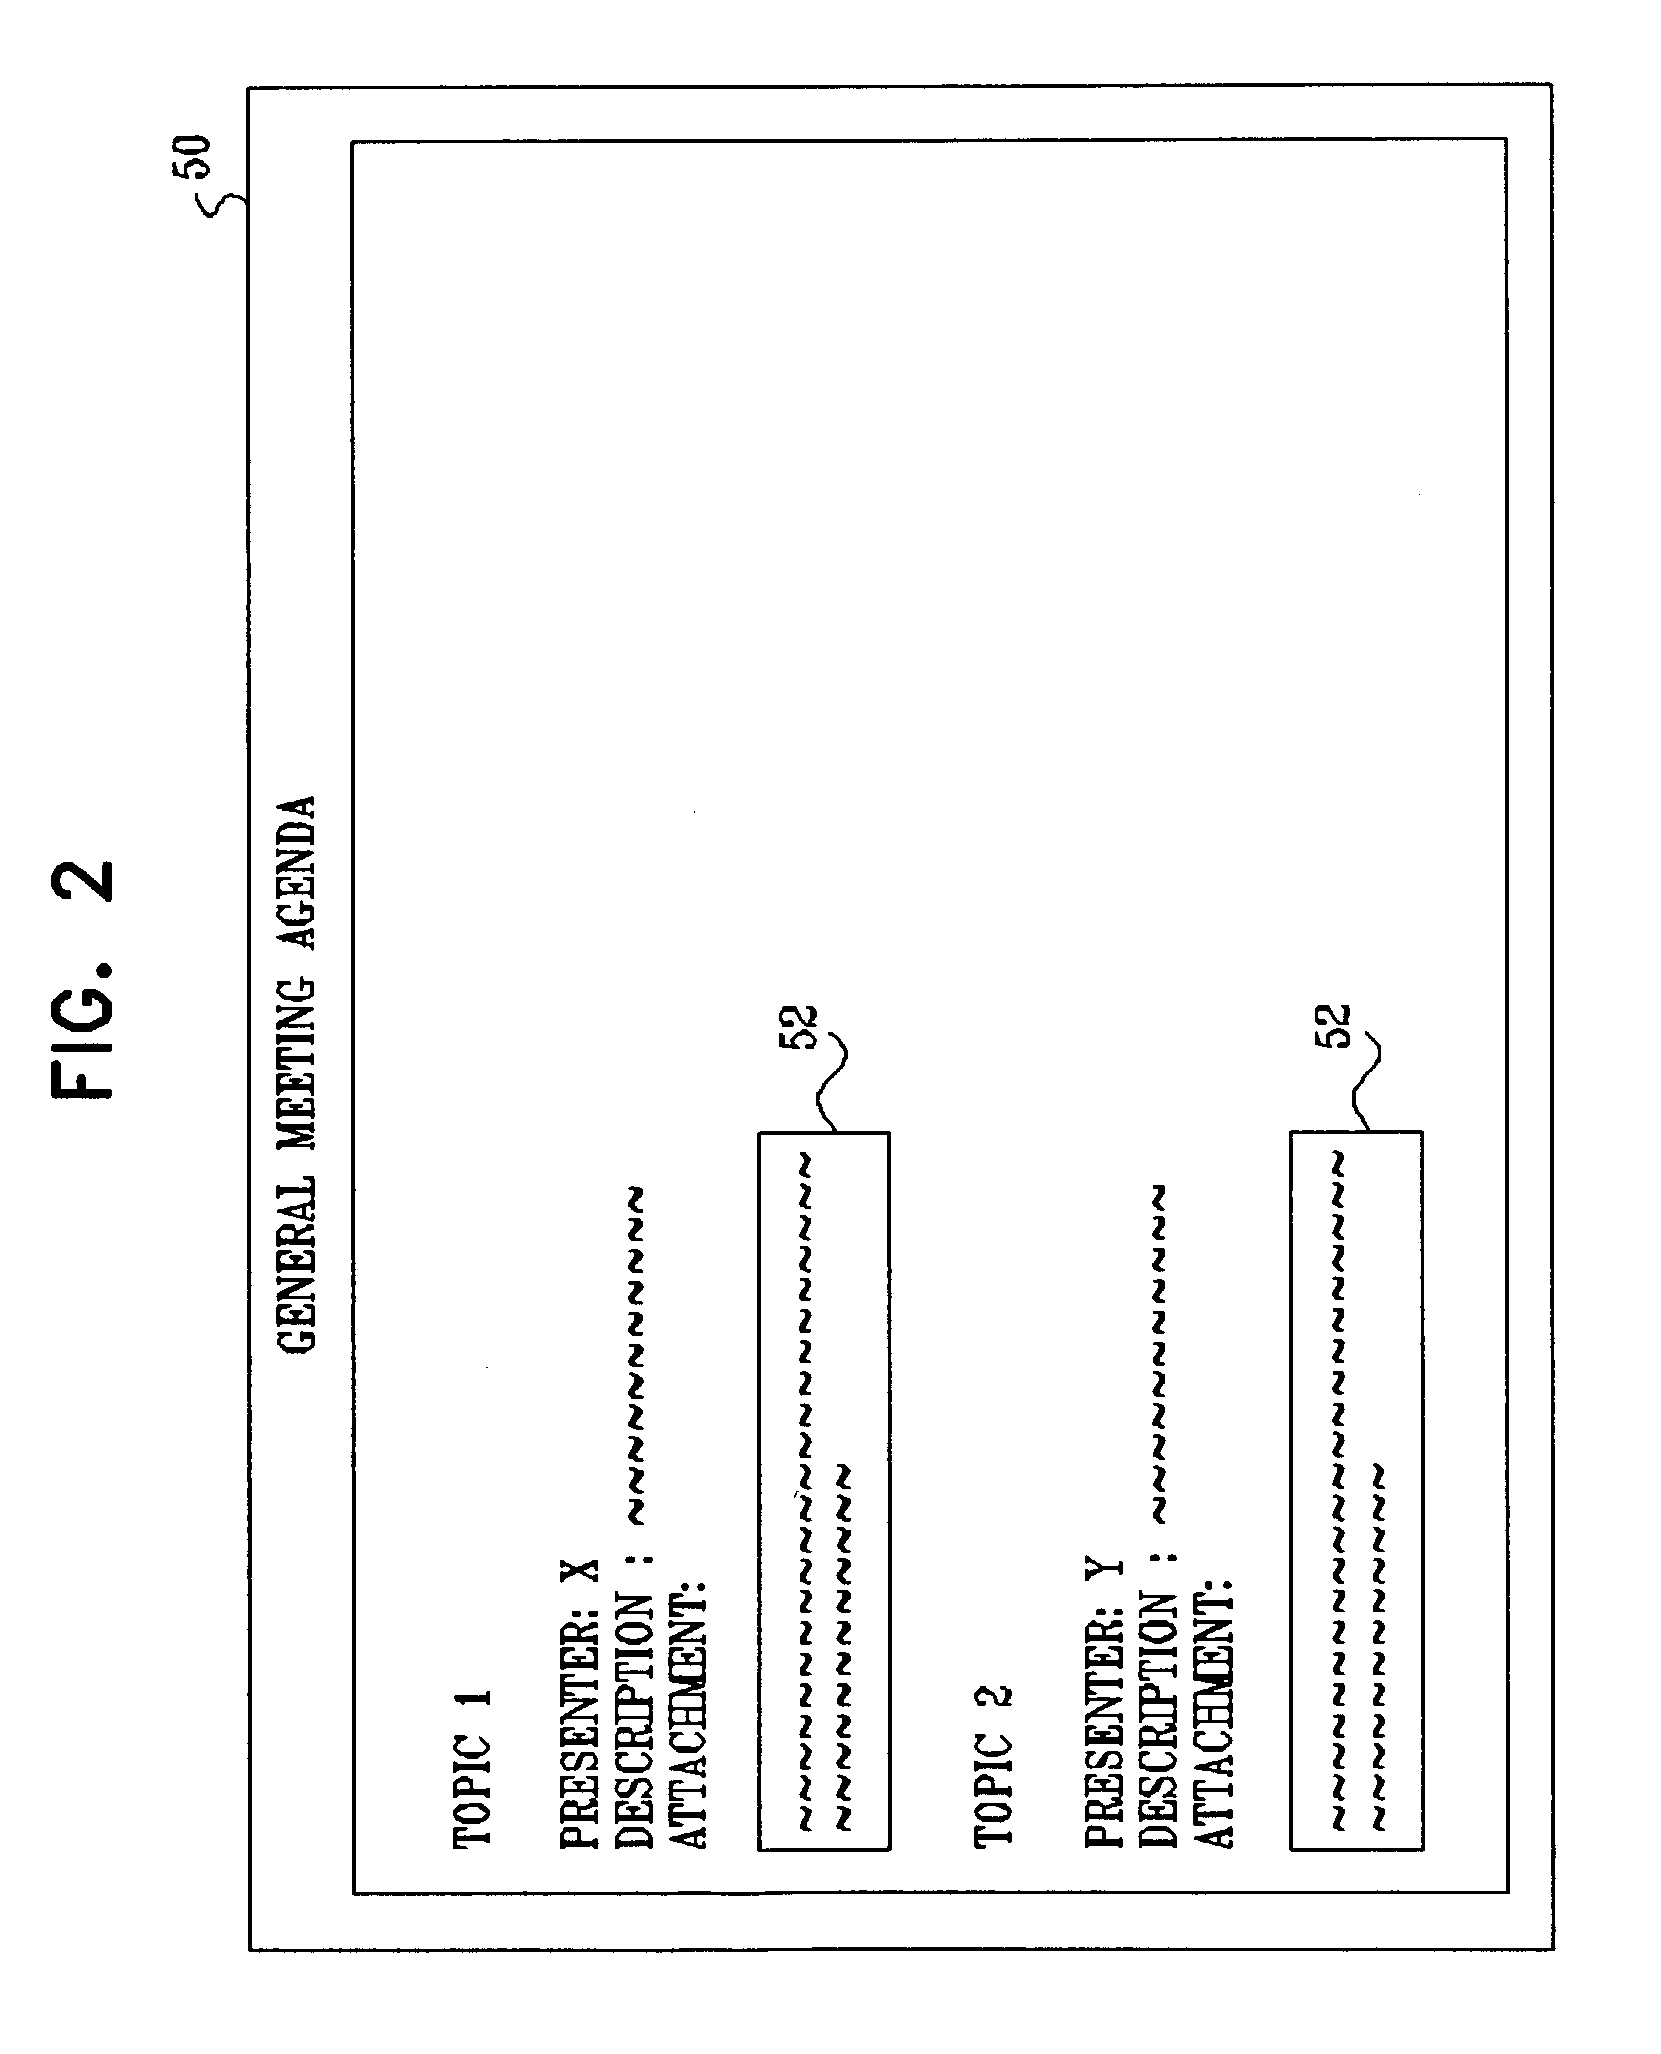 Multi-document context aware annotation system